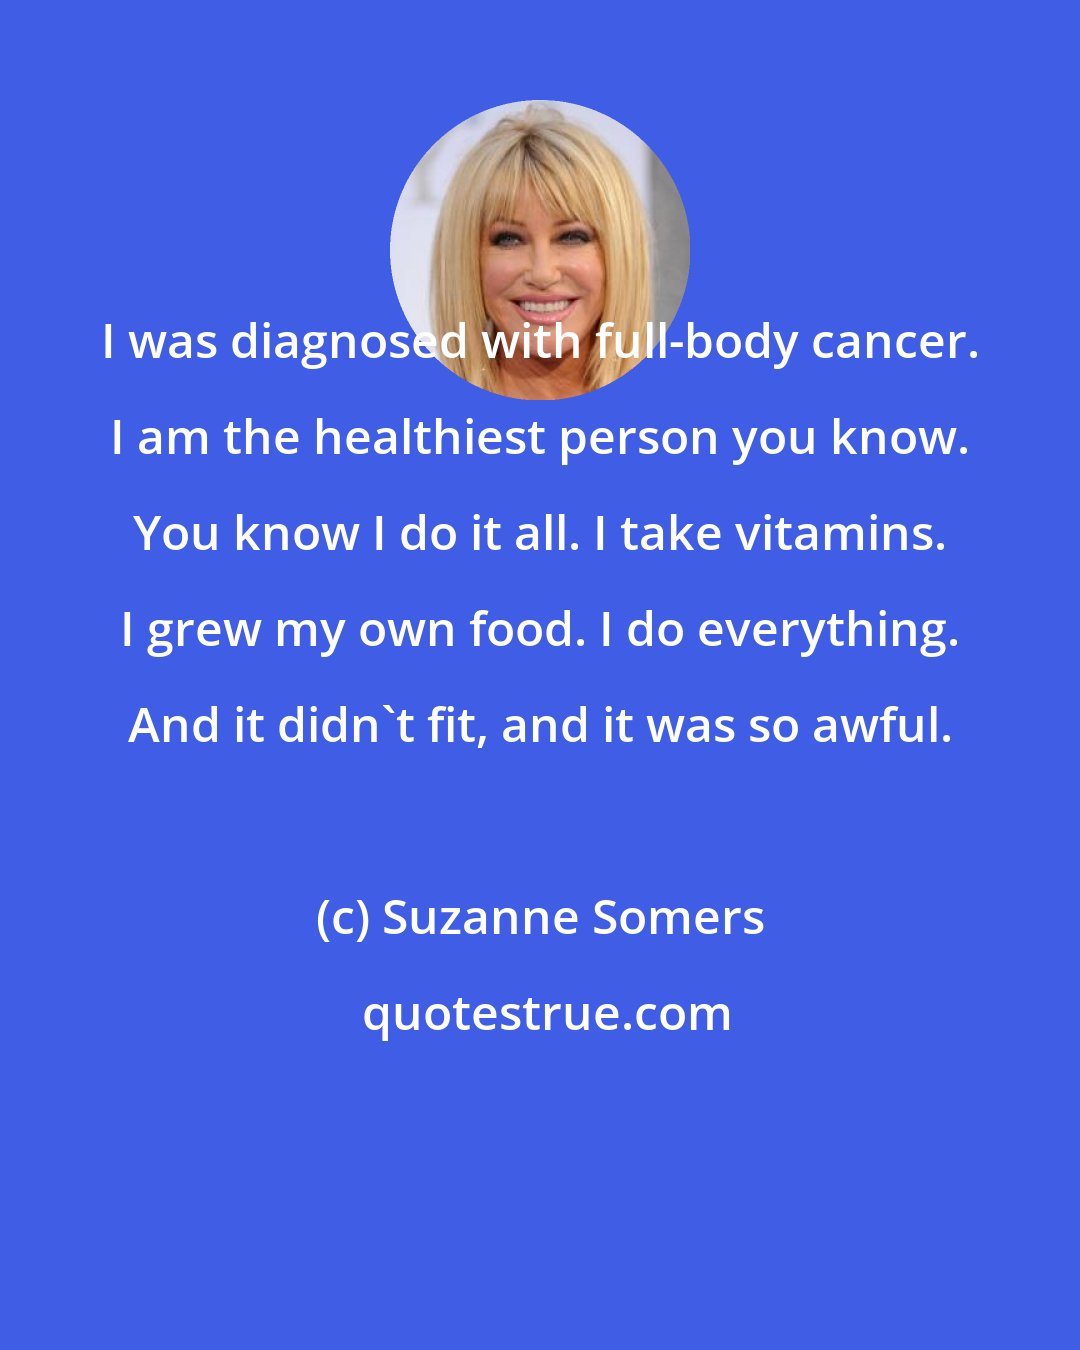 Suzanne Somers: I was diagnosed with full-body cancer. I am the healthiest person you know. You know I do it all. I take vitamins. I grew my own food. I do everything. And it didn't fit, and it was so awful.